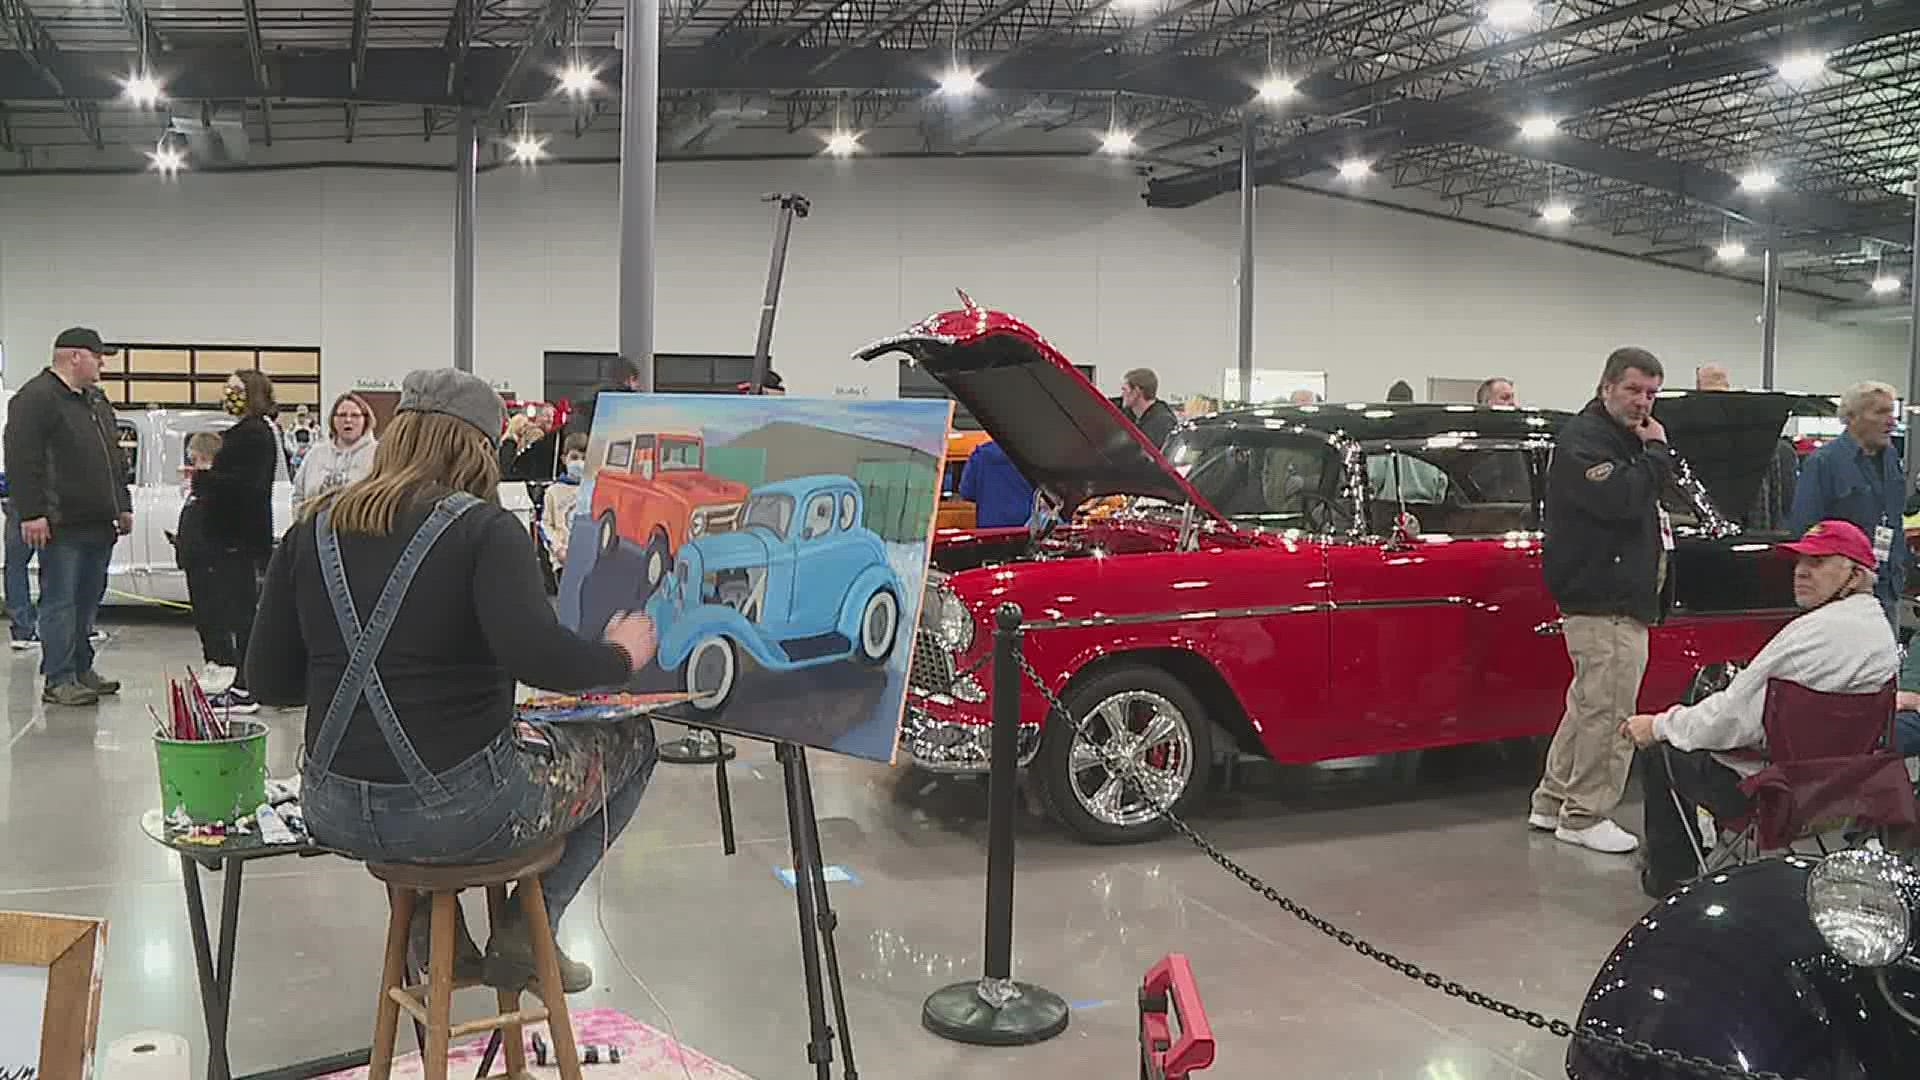 The 2022 show switched venues after more than 30 years at the QCCA Expo Center, but the QCCA President says it's not worried about the expo centers competing.